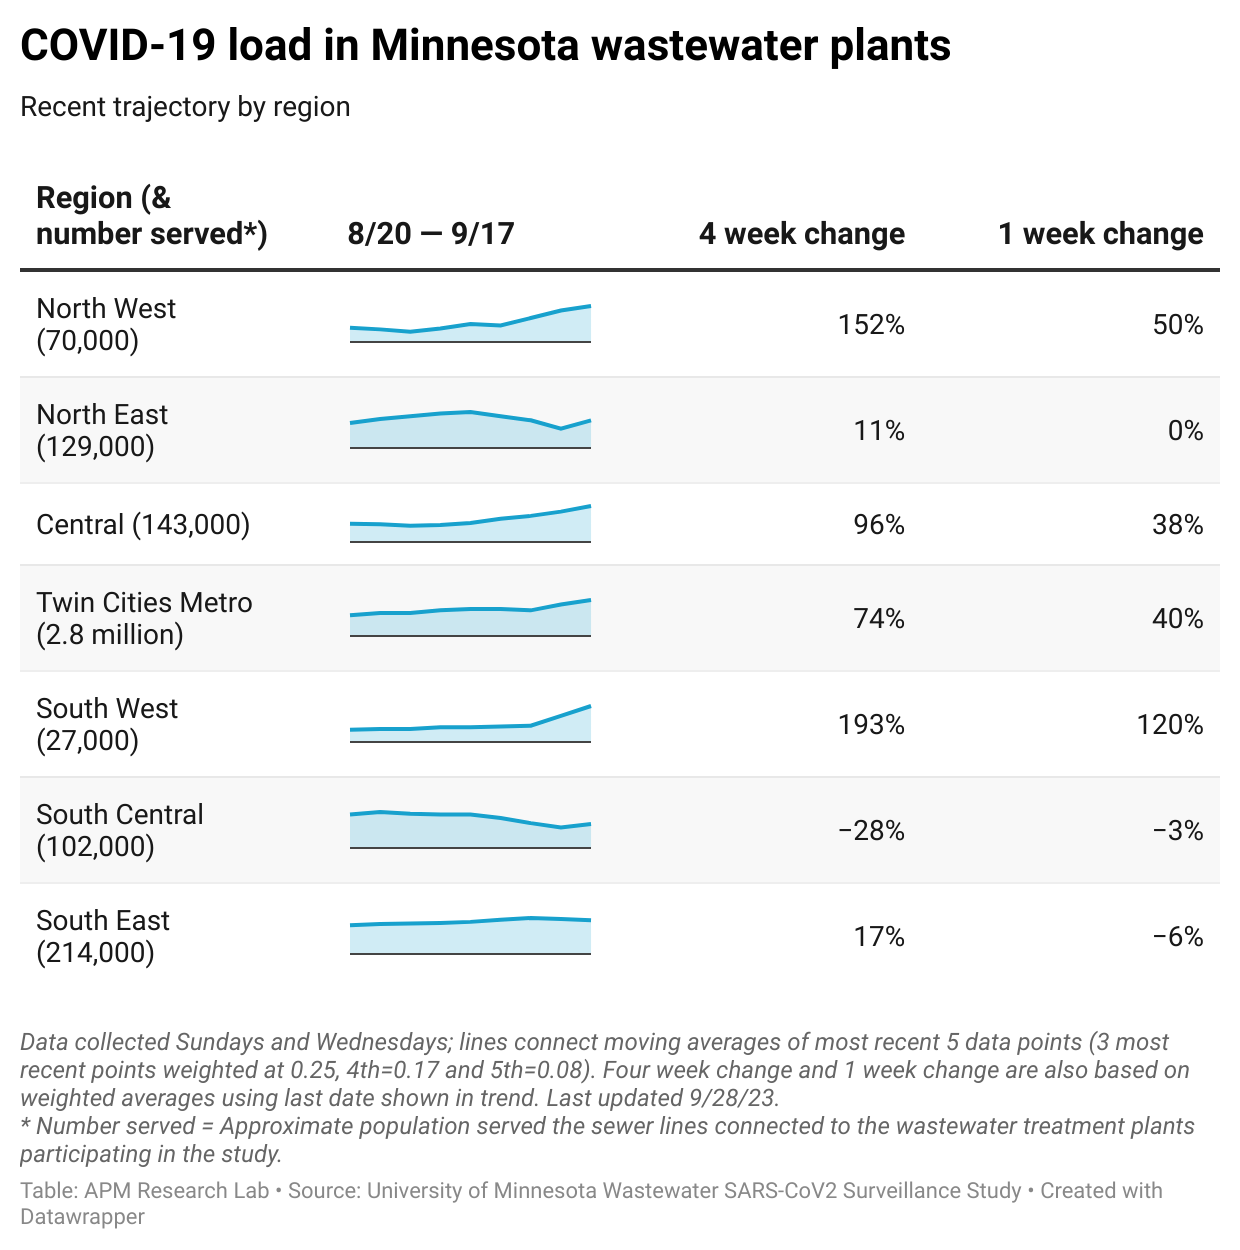 Table showing COVID-19 load in Minnesota wastewater plants